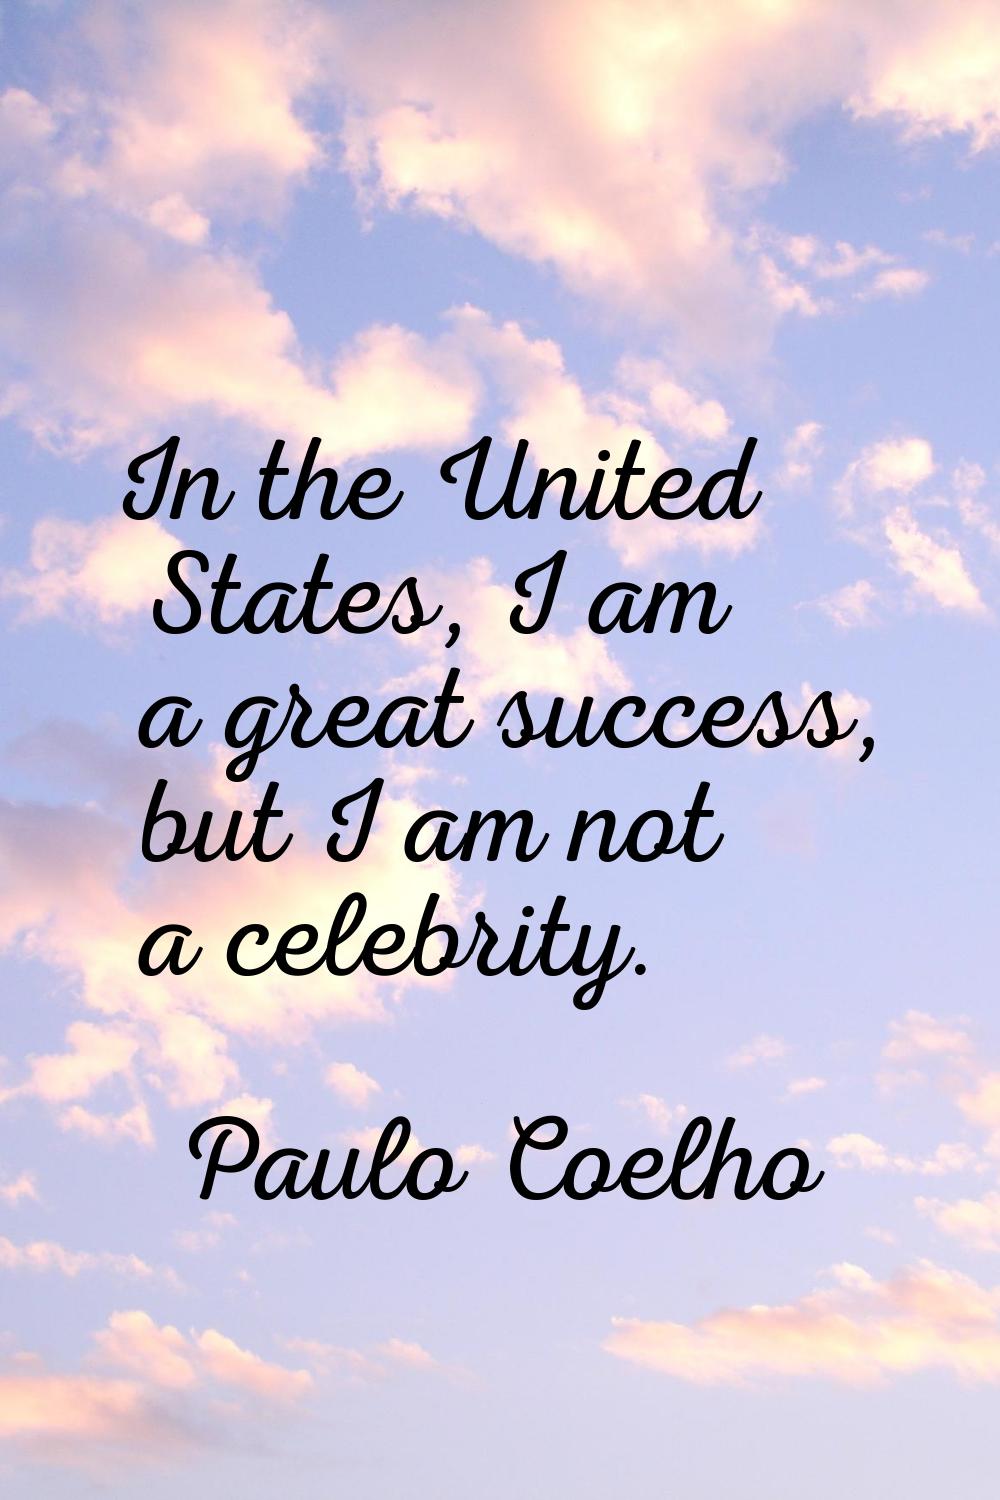 In the United States, I am a great success, but I am not a celebrity.